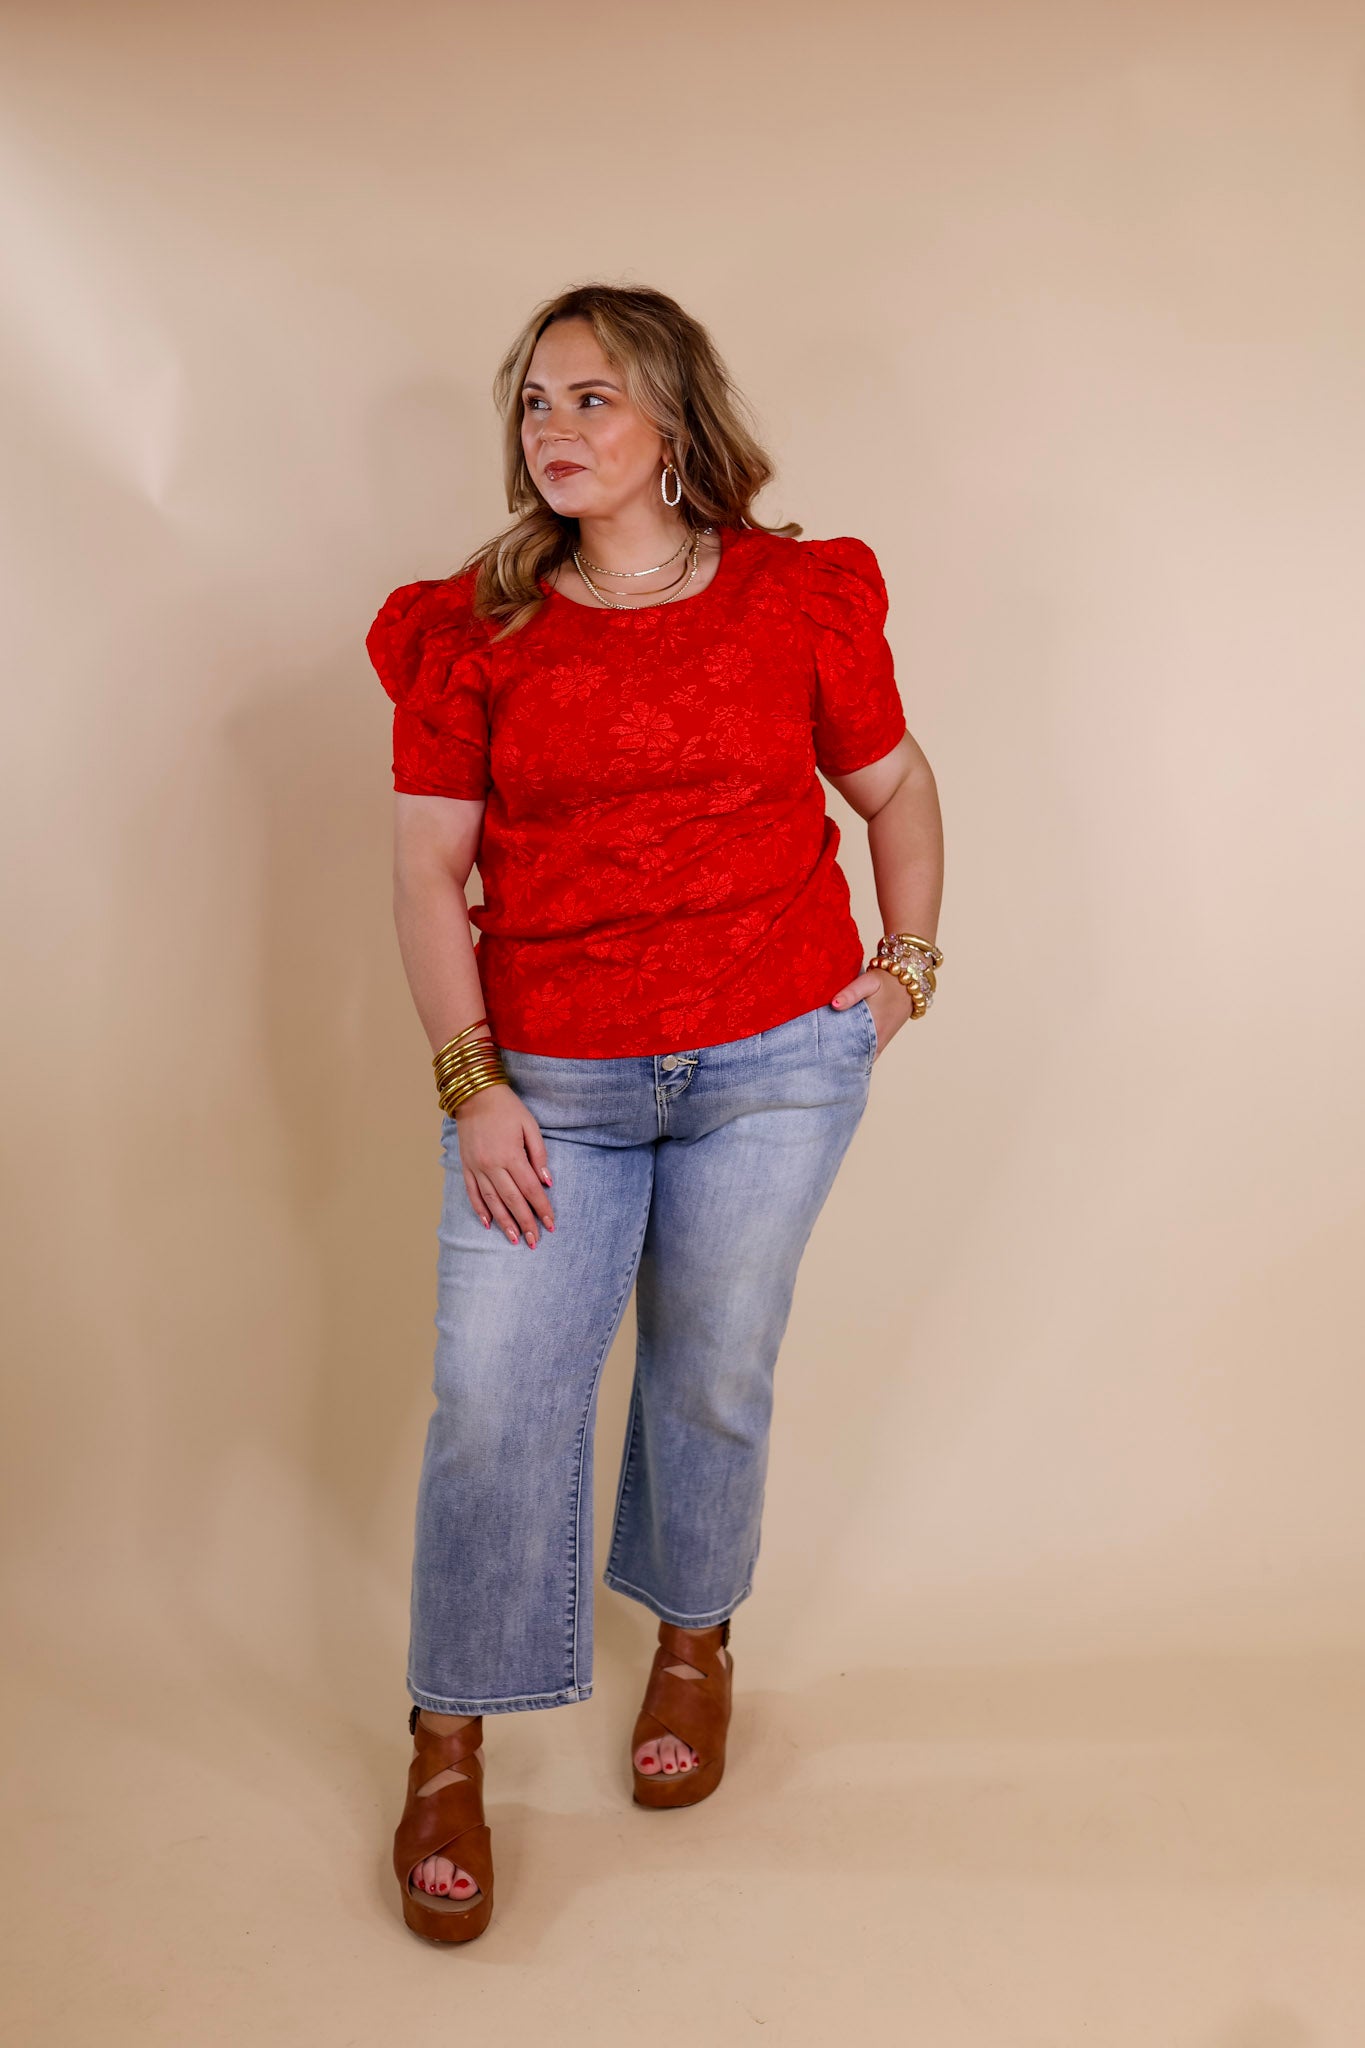 Fab Feeling Puff Shoulder Floral Embossed Top in Red - Giddy Up Glamour Boutique